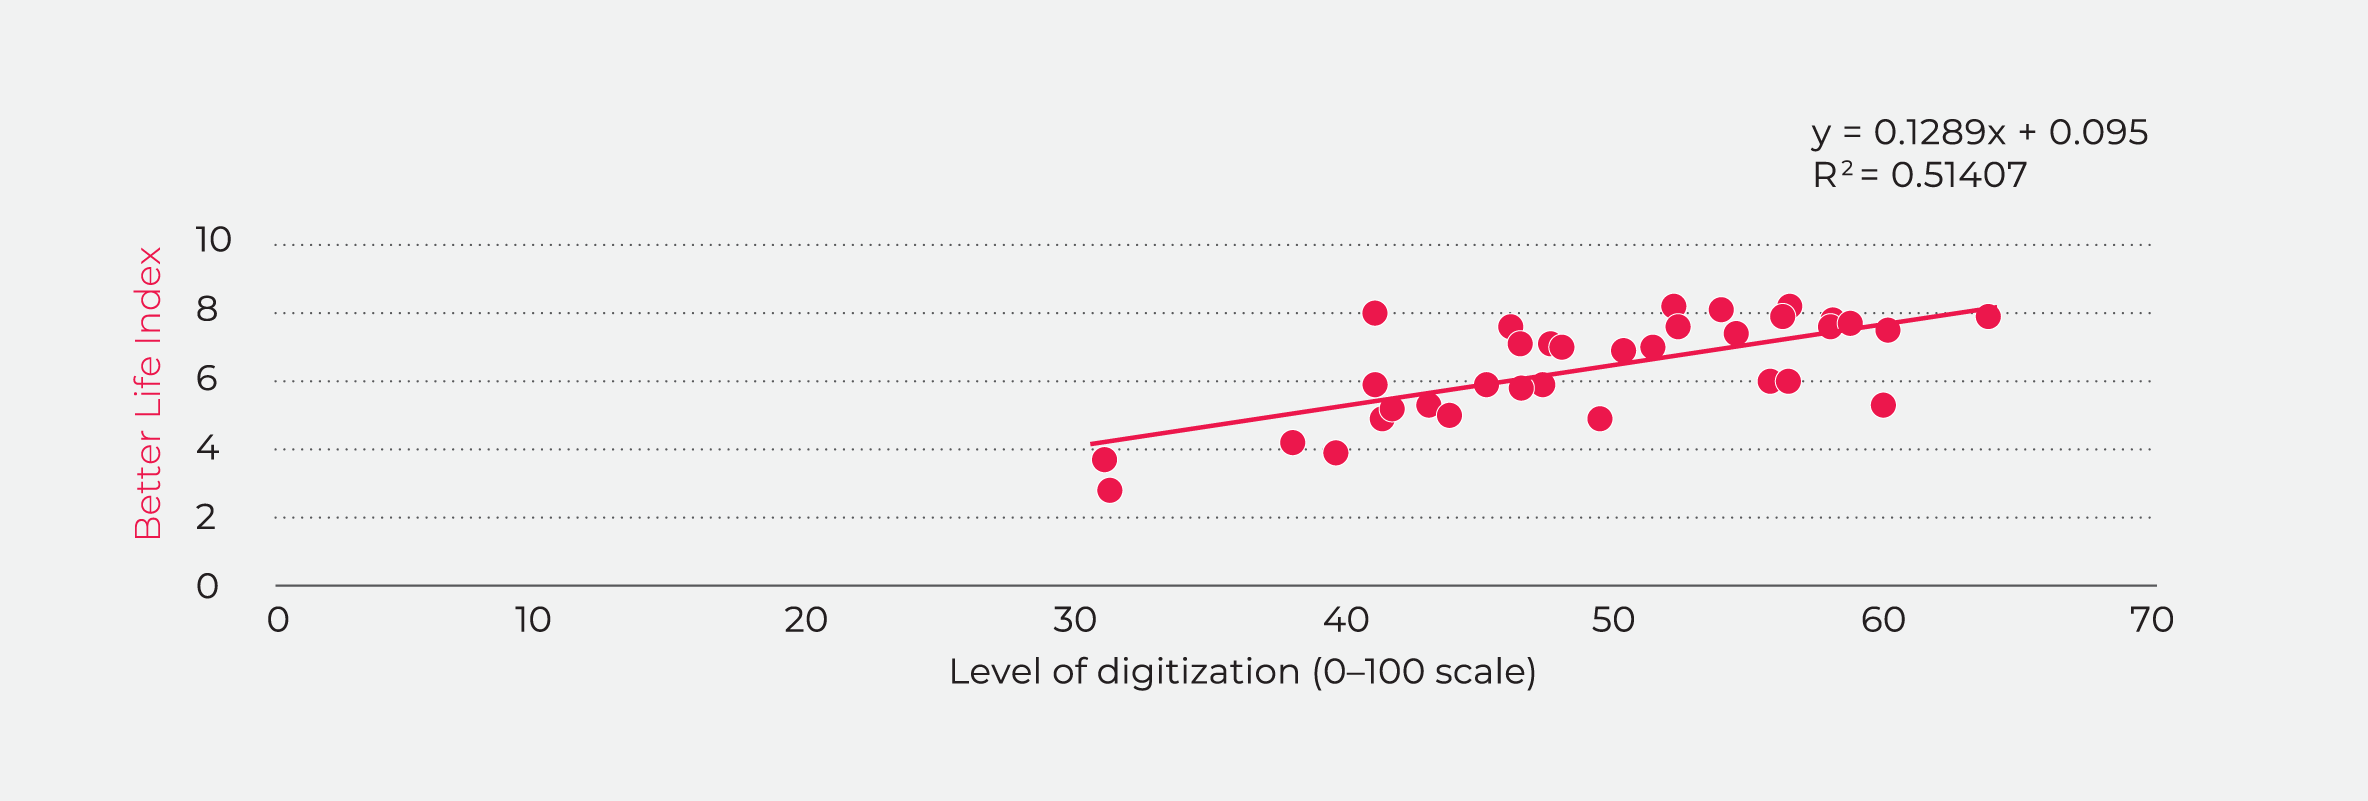 Digitization and the Better Life Index (34 OECD countries)